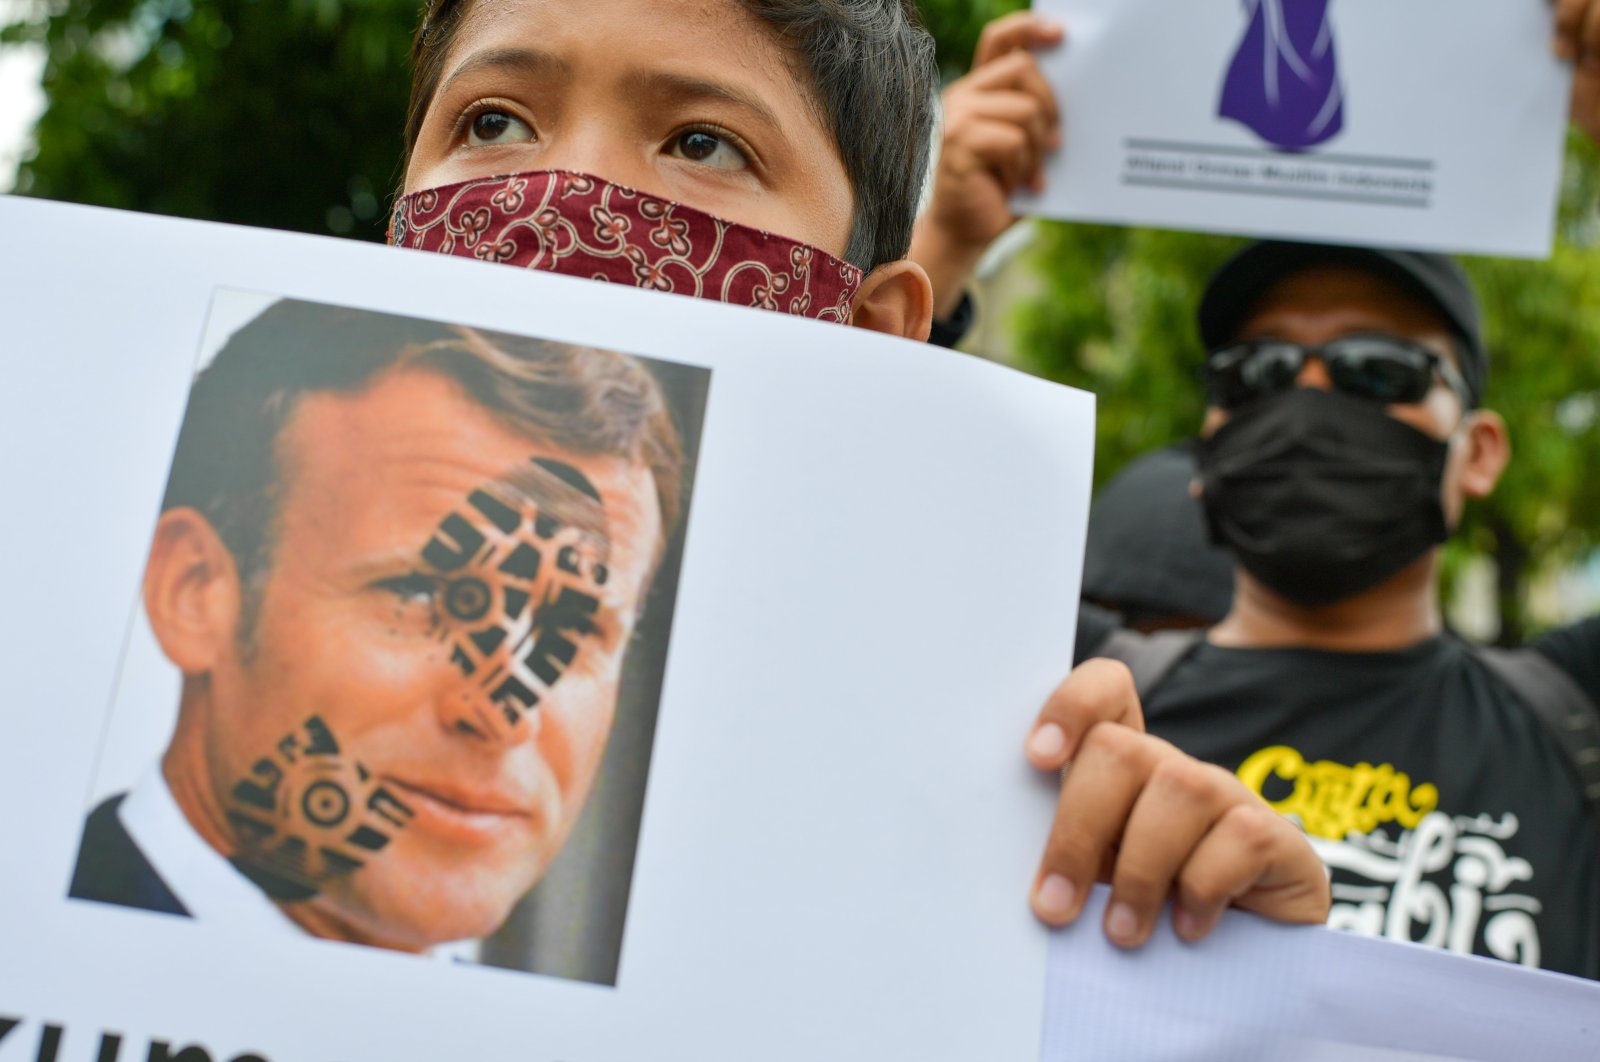 Muslim protesters display an image of French President Emmanuel Macron during an anti-France demonstration in Jakarta, Indonesia, Nov. 4, 2020. (AFP Photo)